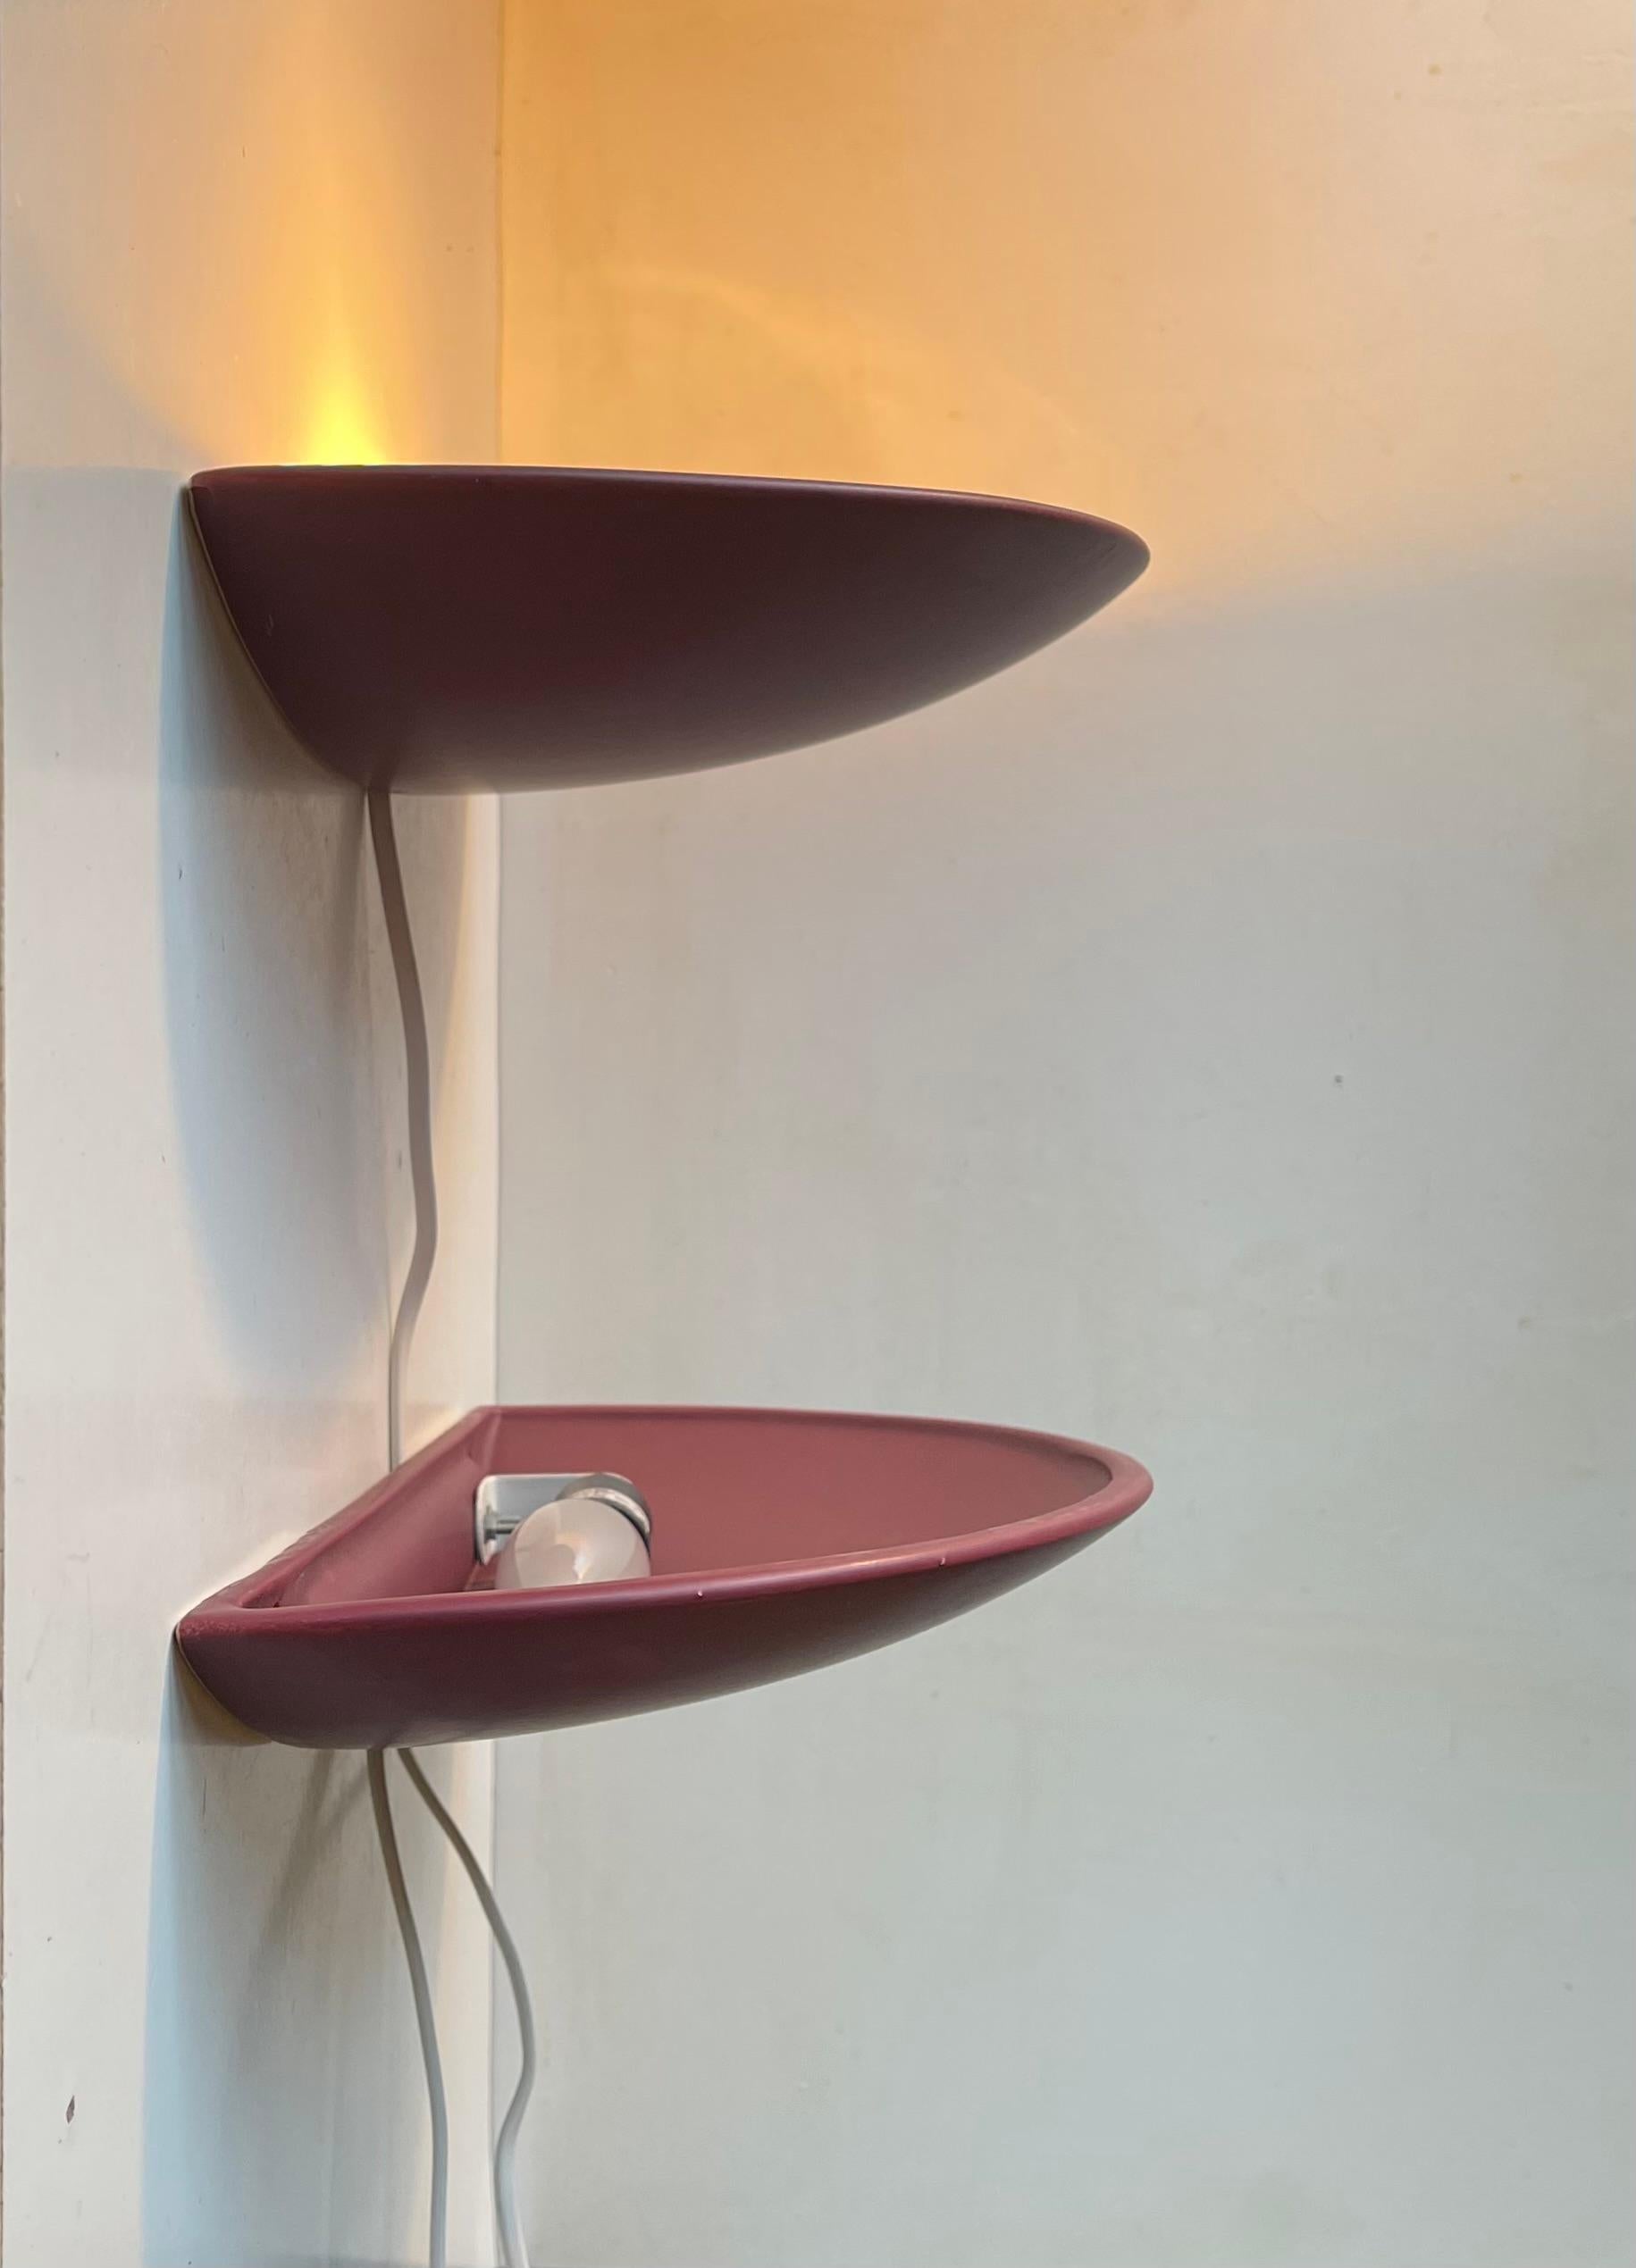 A pair of large ceramic up-light wall lights with a plum type magenta semiv-matté glaze. Manufactured in Denmark during the 1980s. E14 bulbs/sockets up to 40 watts. Measurements: W: 35 cm, Dept: 18 cm, Height: 5 cm. The price is for the set of 2.